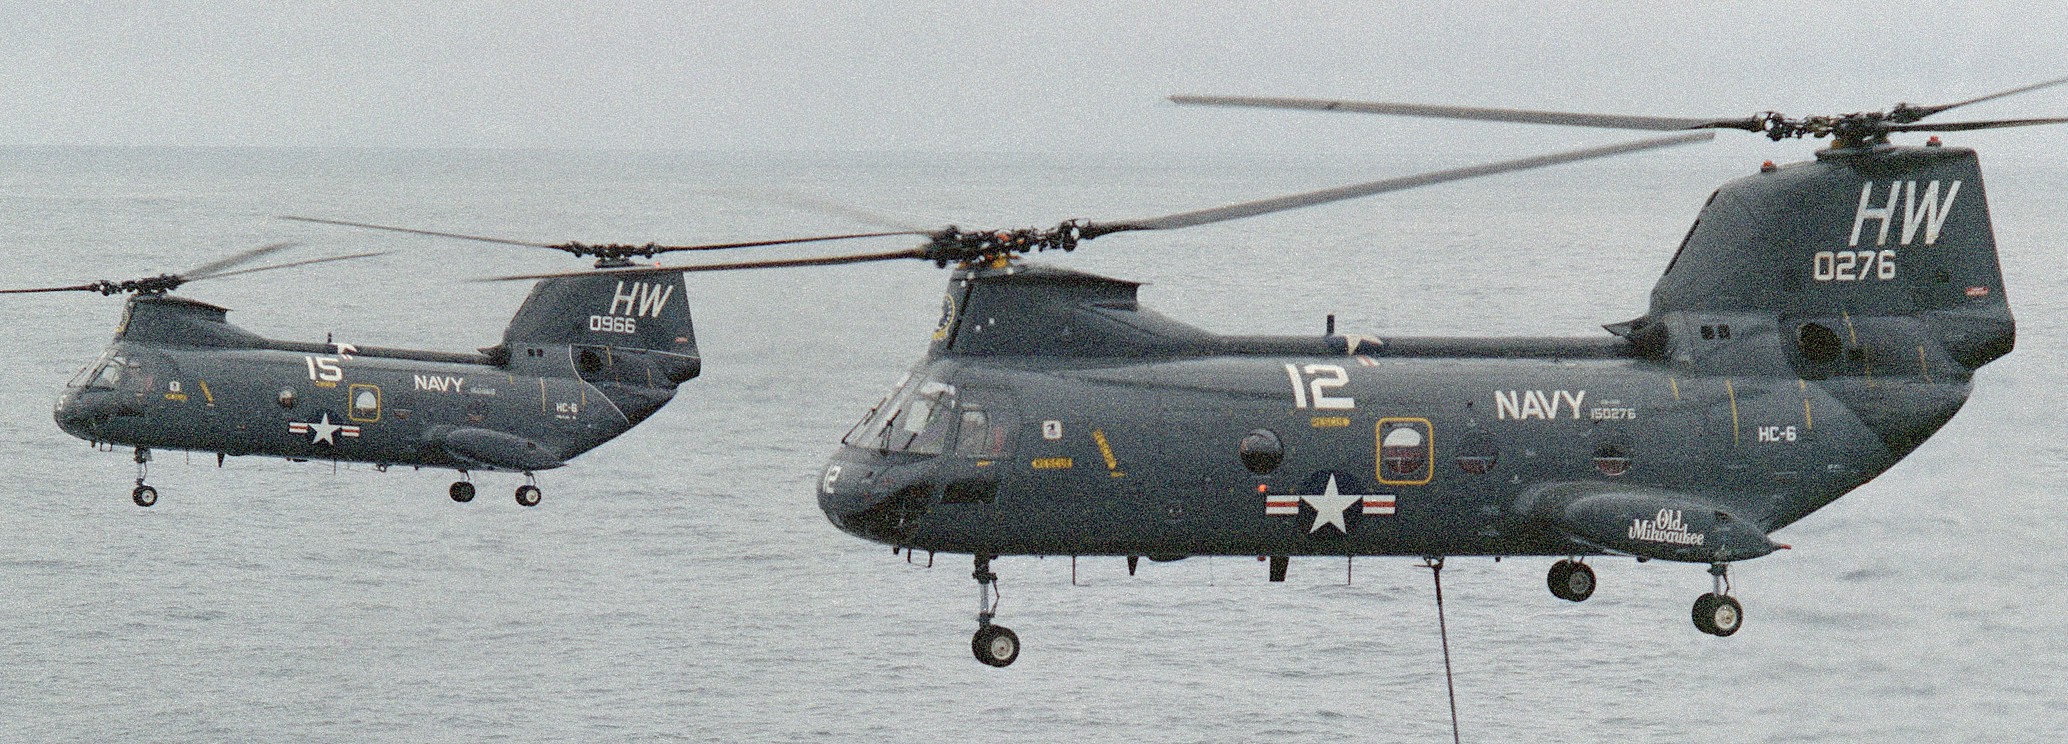 hc-6 chargers helicopter combat support squadron navy ch-46 sea knight 78